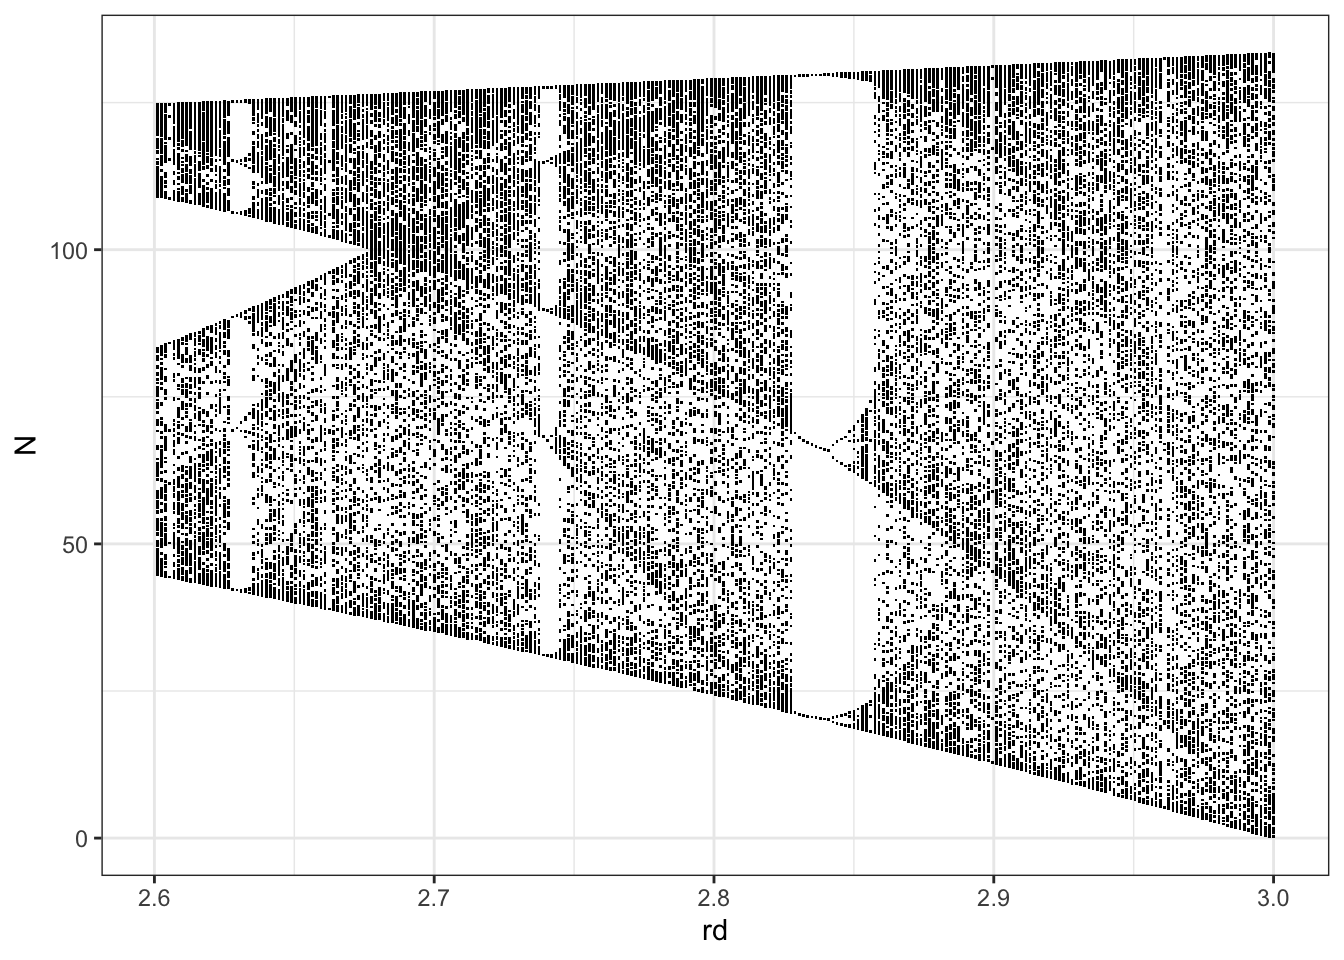 An expanded view showing more detail, from of a subset of the previous figure, where $r_d > 2.6. Note that we didn't run simulations long enough to show the infinite number of stable point attractors. That would kind of be impossible. However, what you can see is that a system can have regions of $r_d$ where attractors change density near different values of $N$.